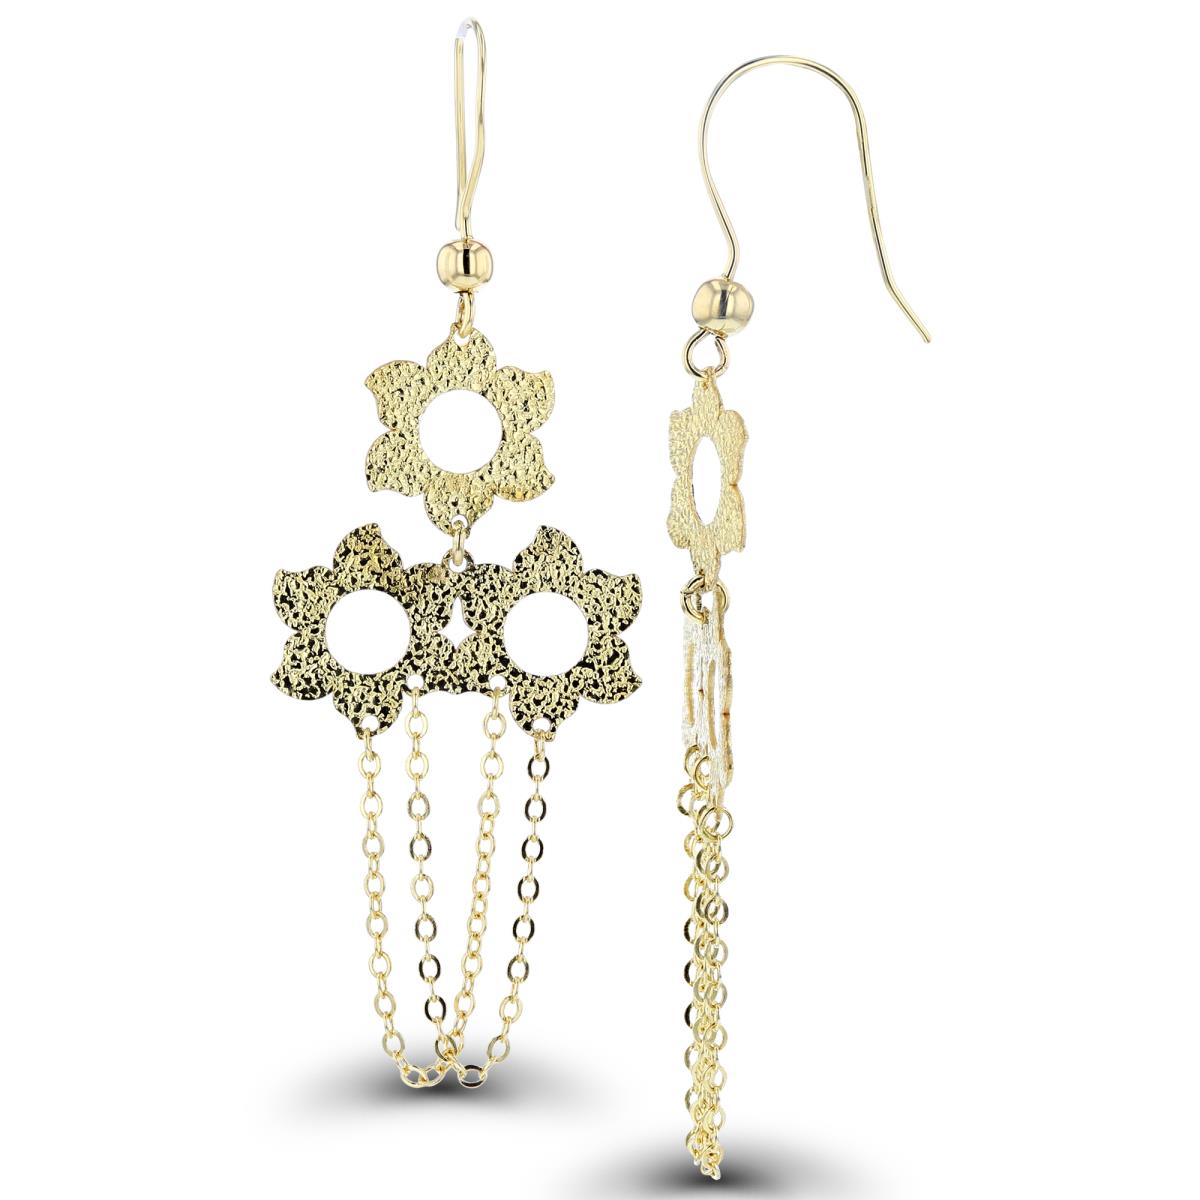 14K Yellow Gold Textured Flowers with Spools Chandelier Dangling Earrings with Fish Hook